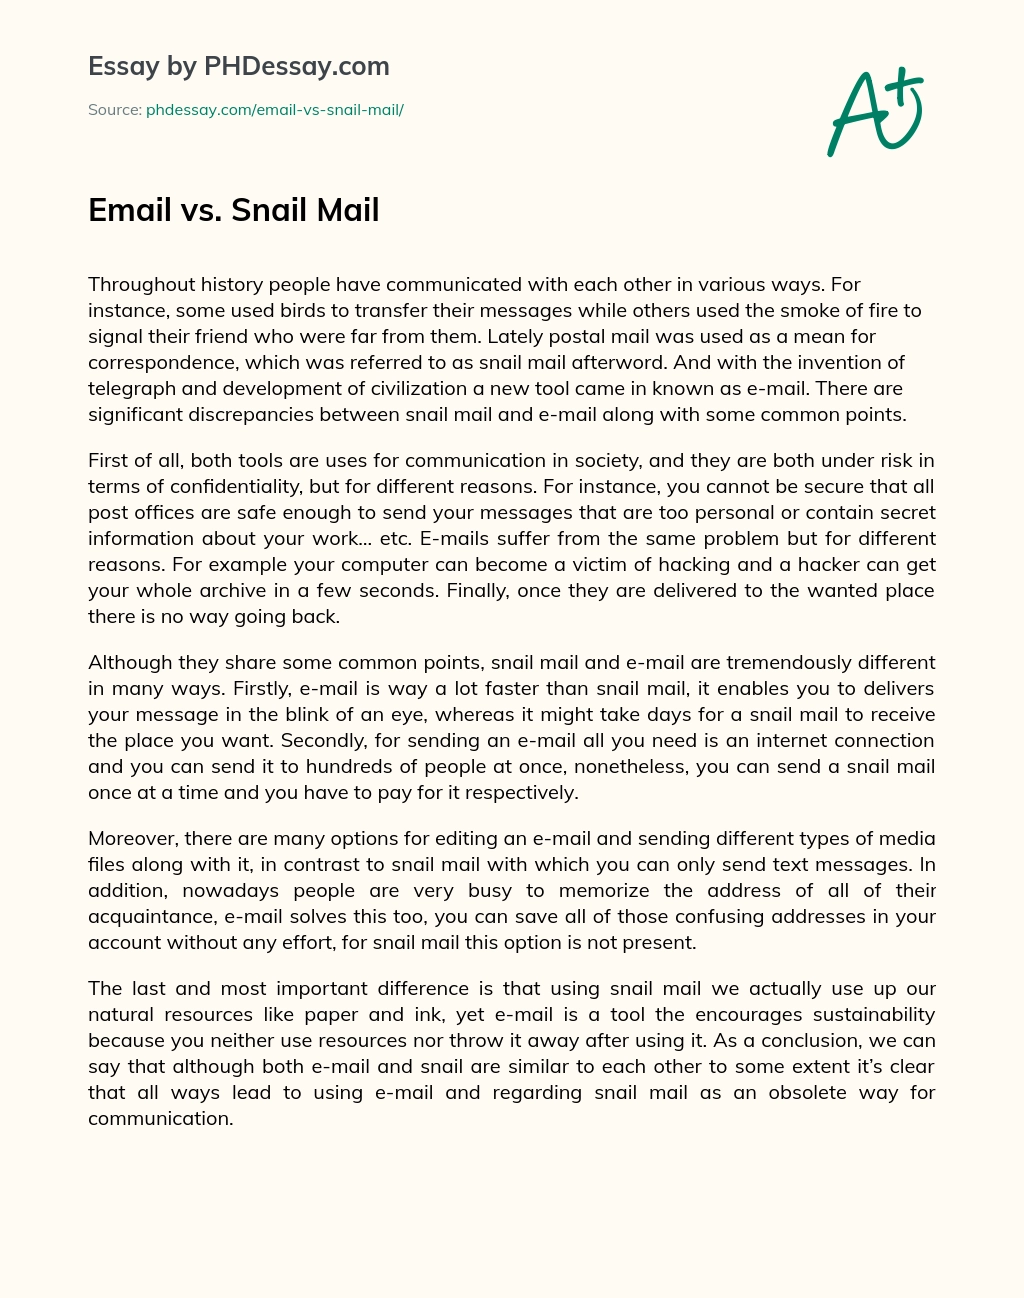 Email vs. Snail Mail essay